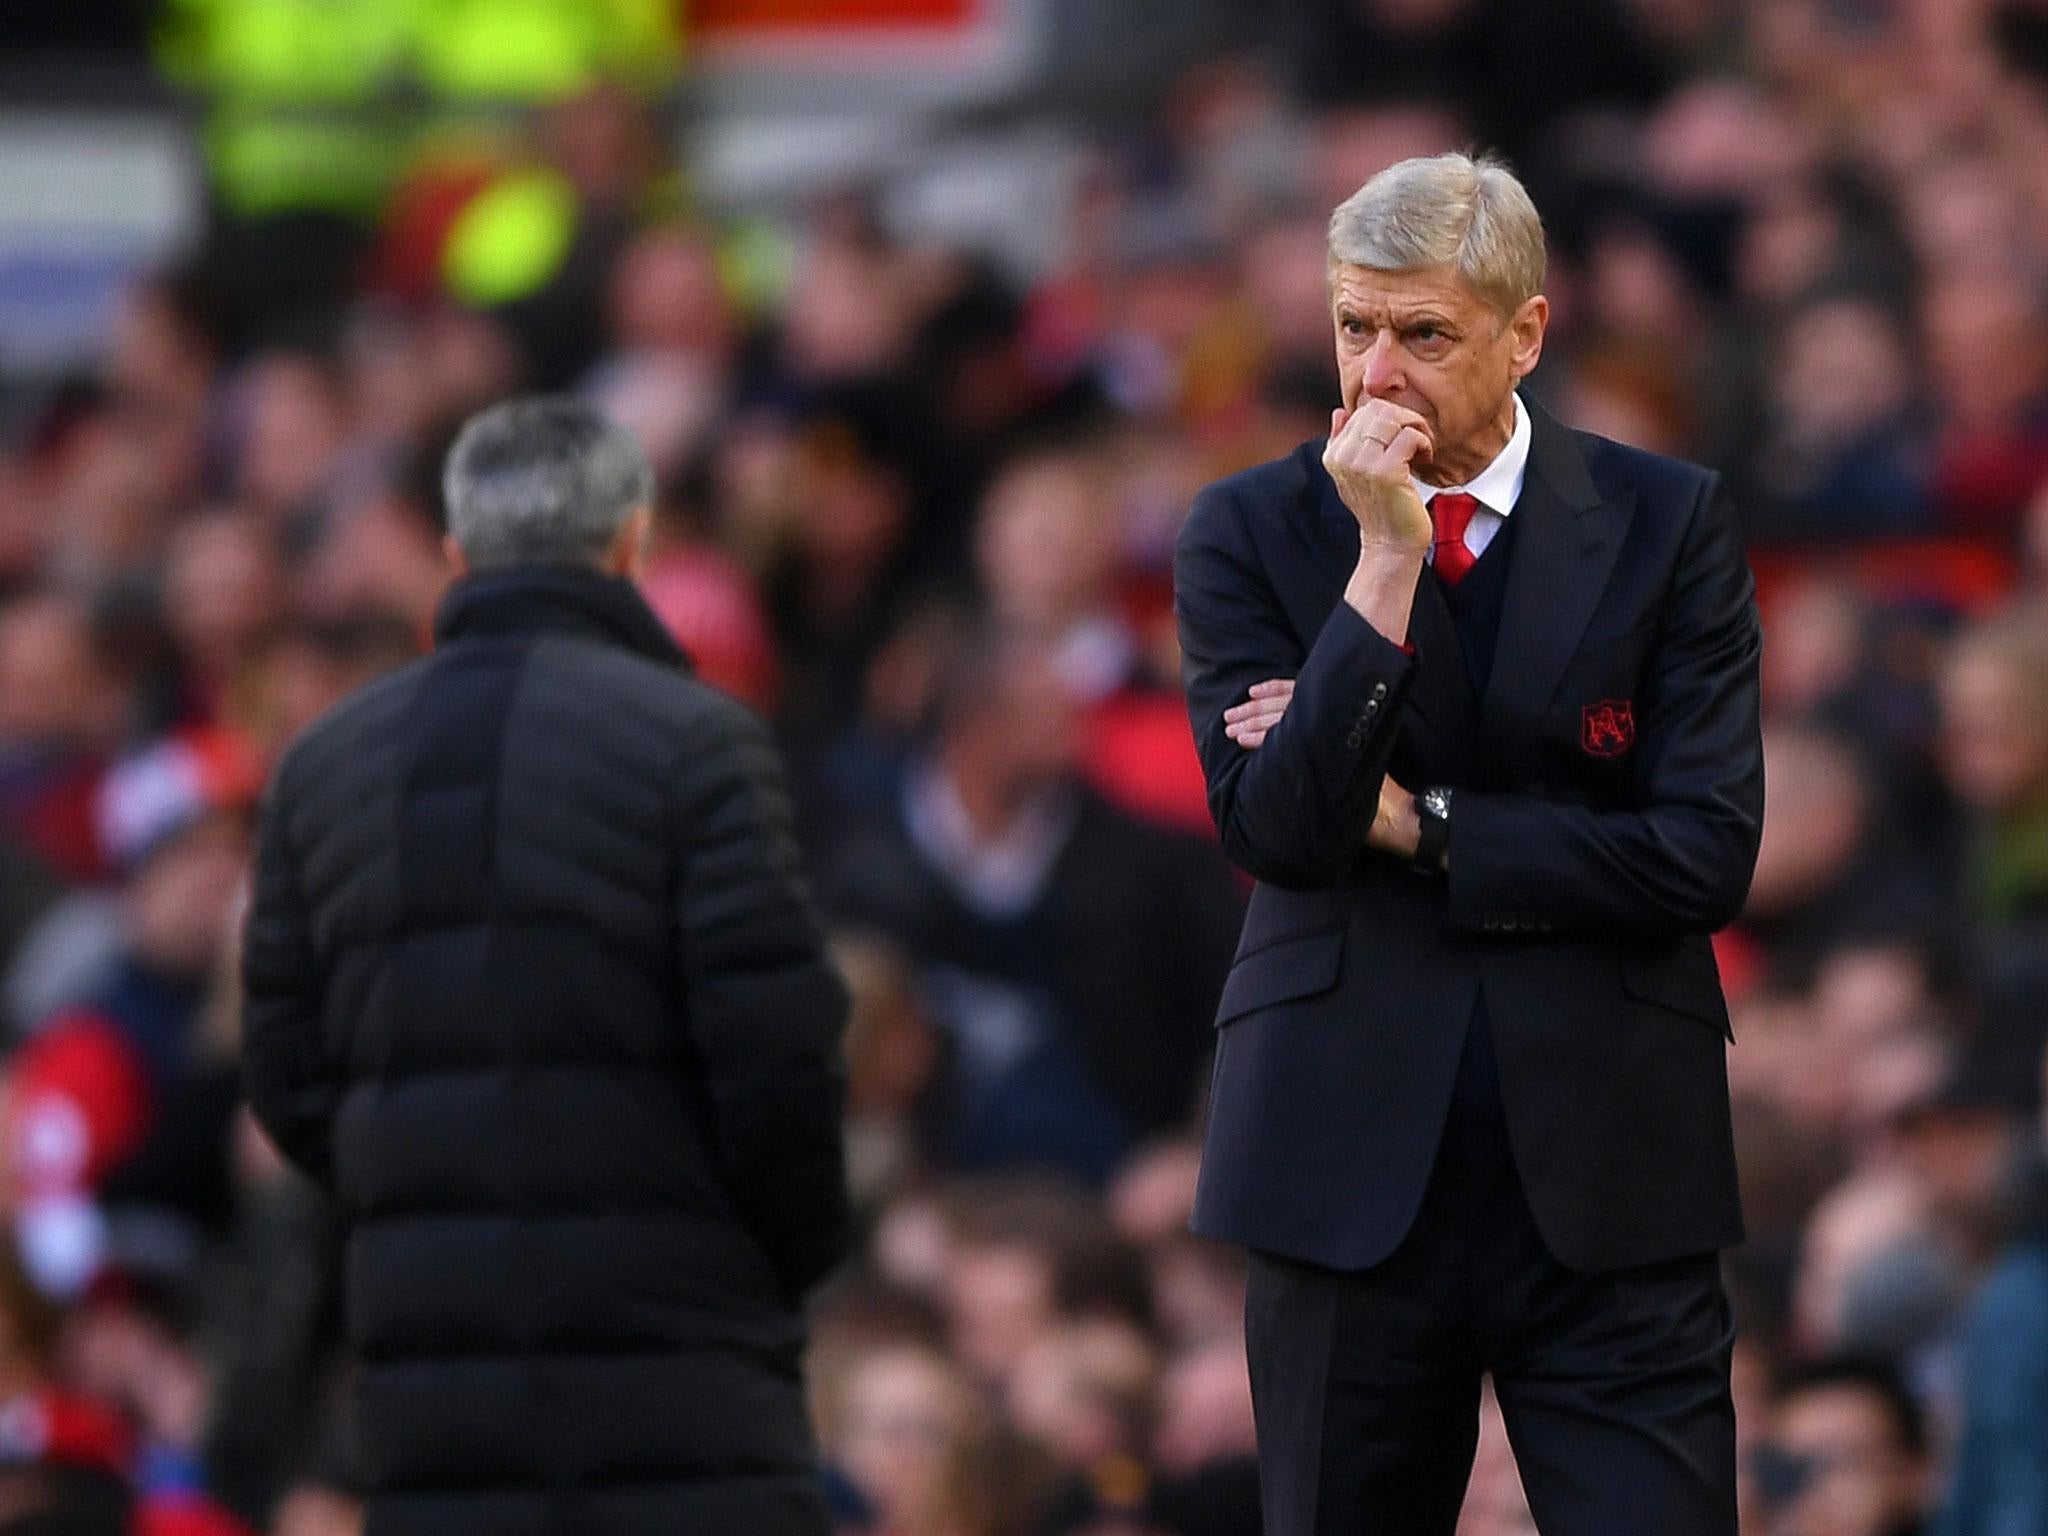 Arsenal news: Arsene Wenger draws 'belief' from Manchester United draw that felt more like a victory